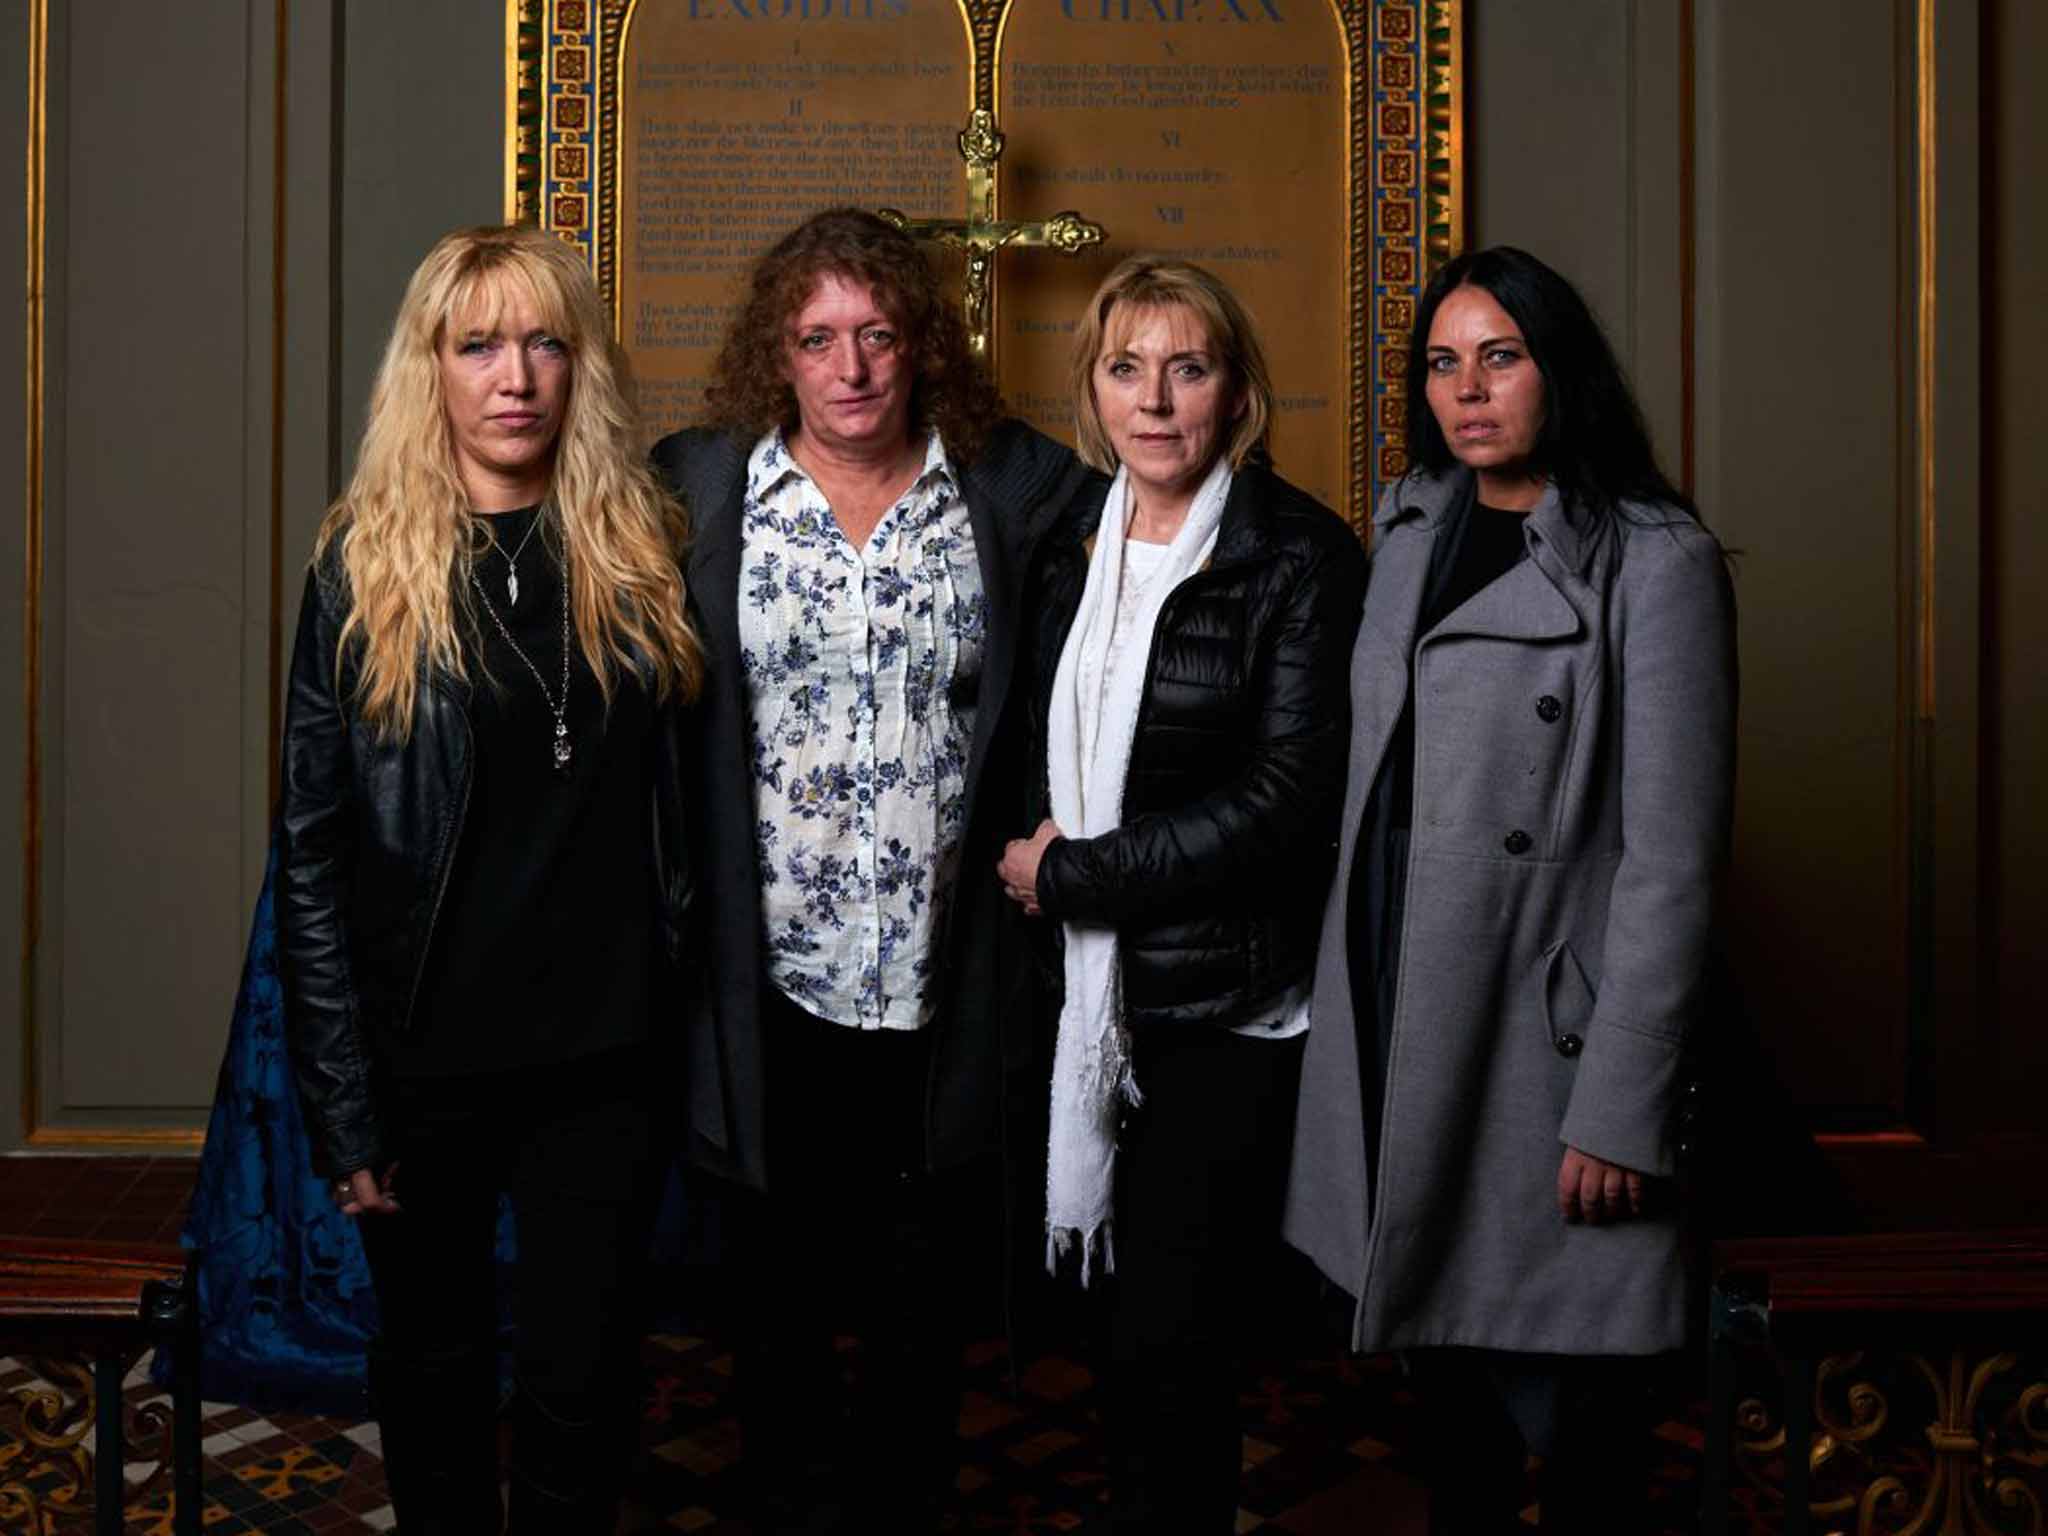 Lorna and Yvonne Dick, Janette and Nicola Reid, all victims' relatives